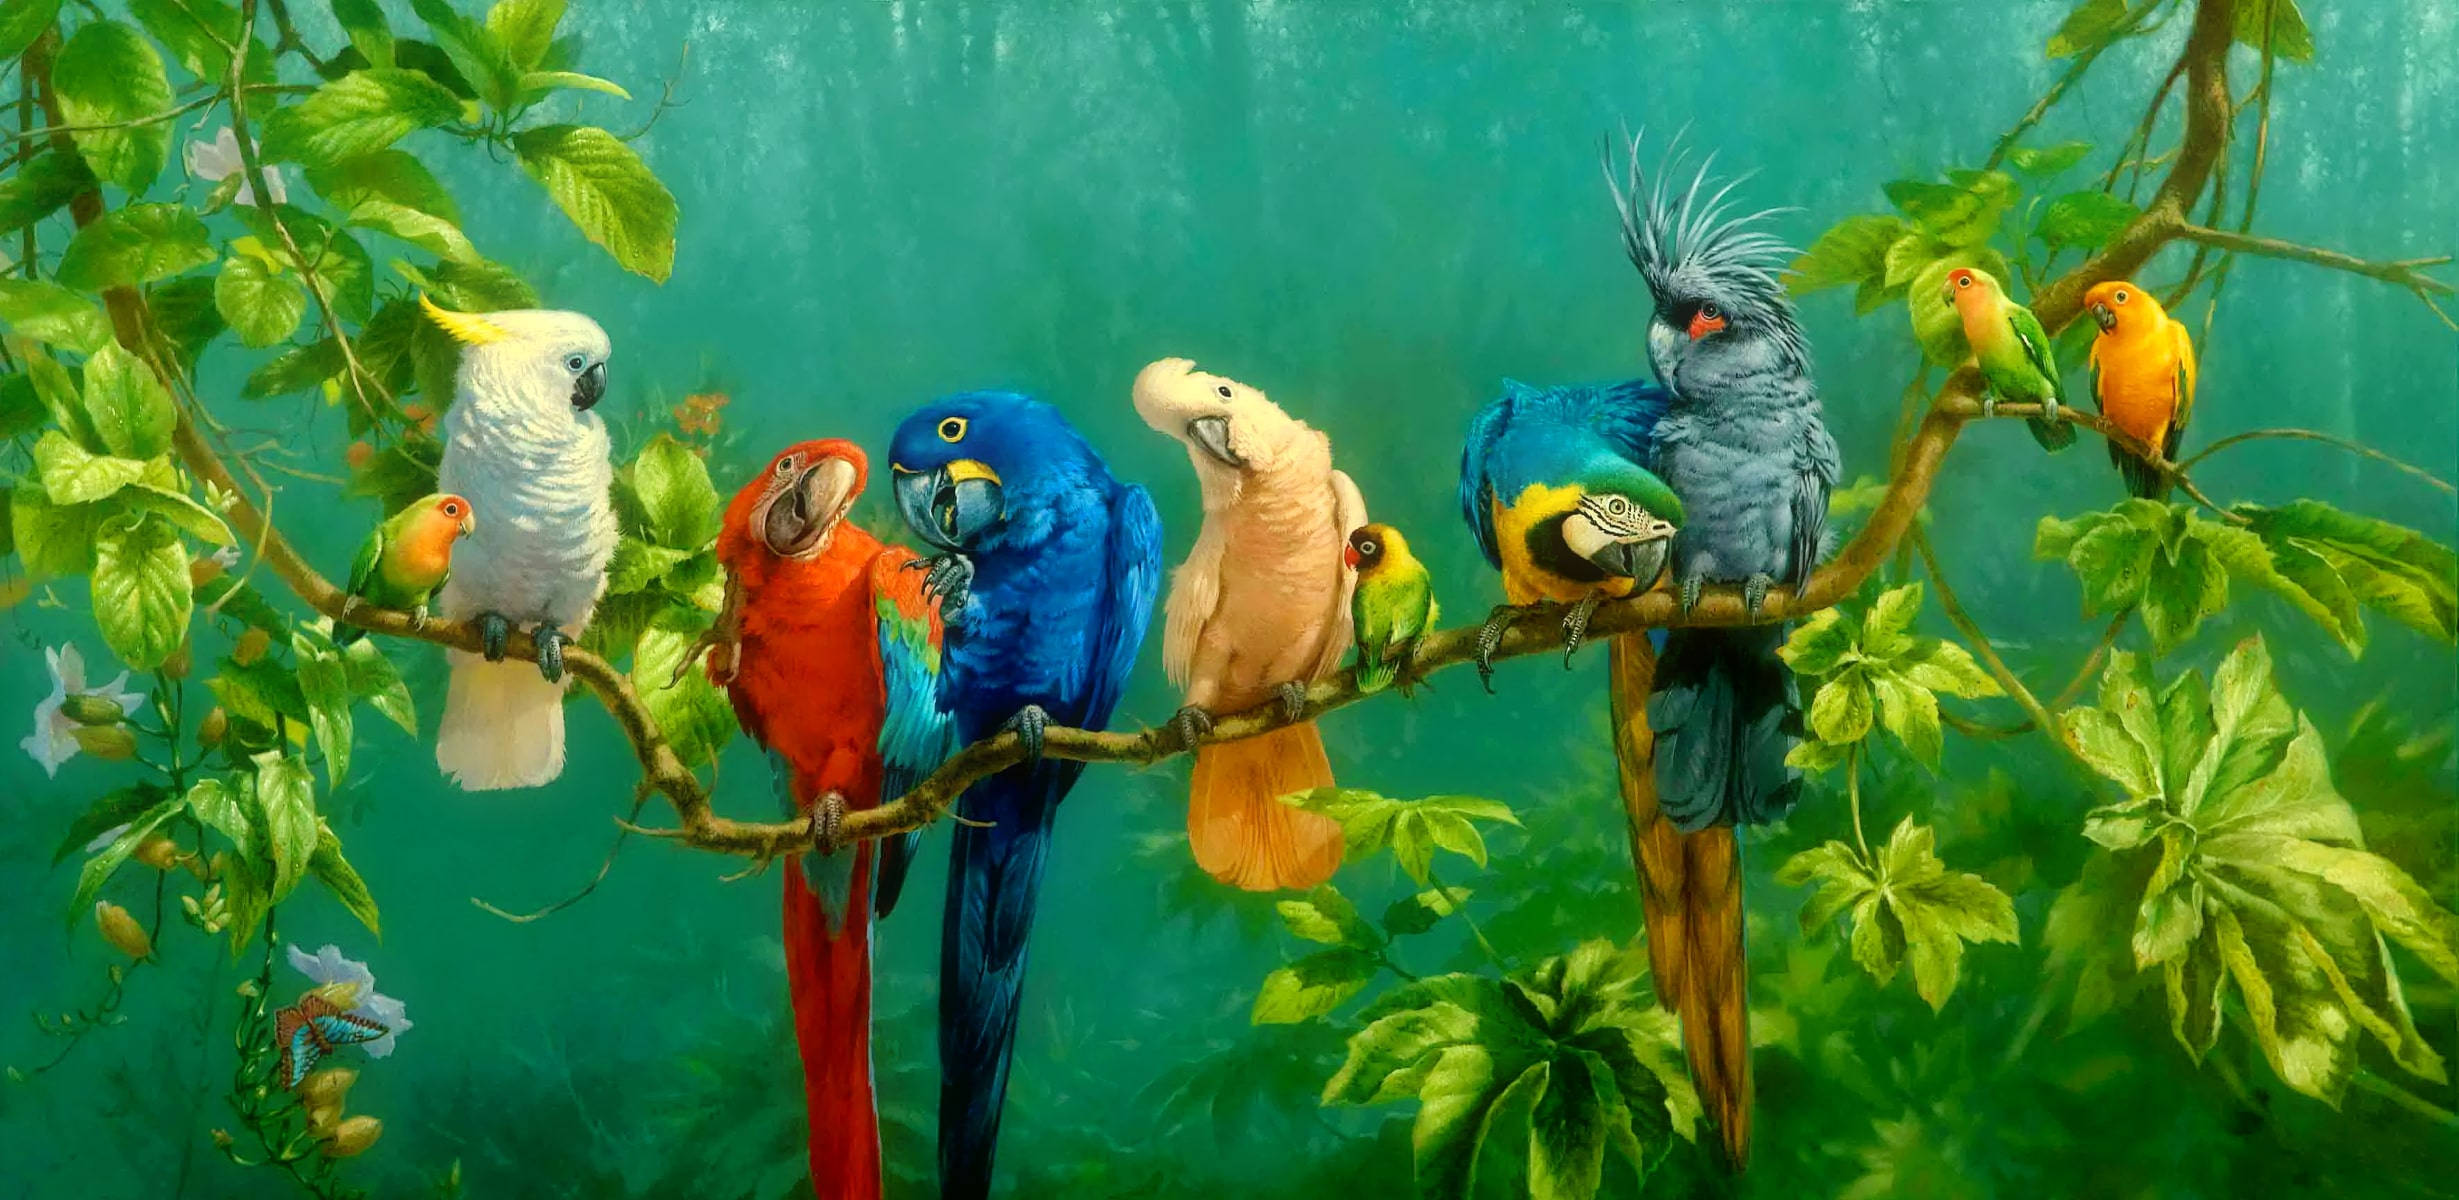 Parrots In The Forest Painting Wallpaper